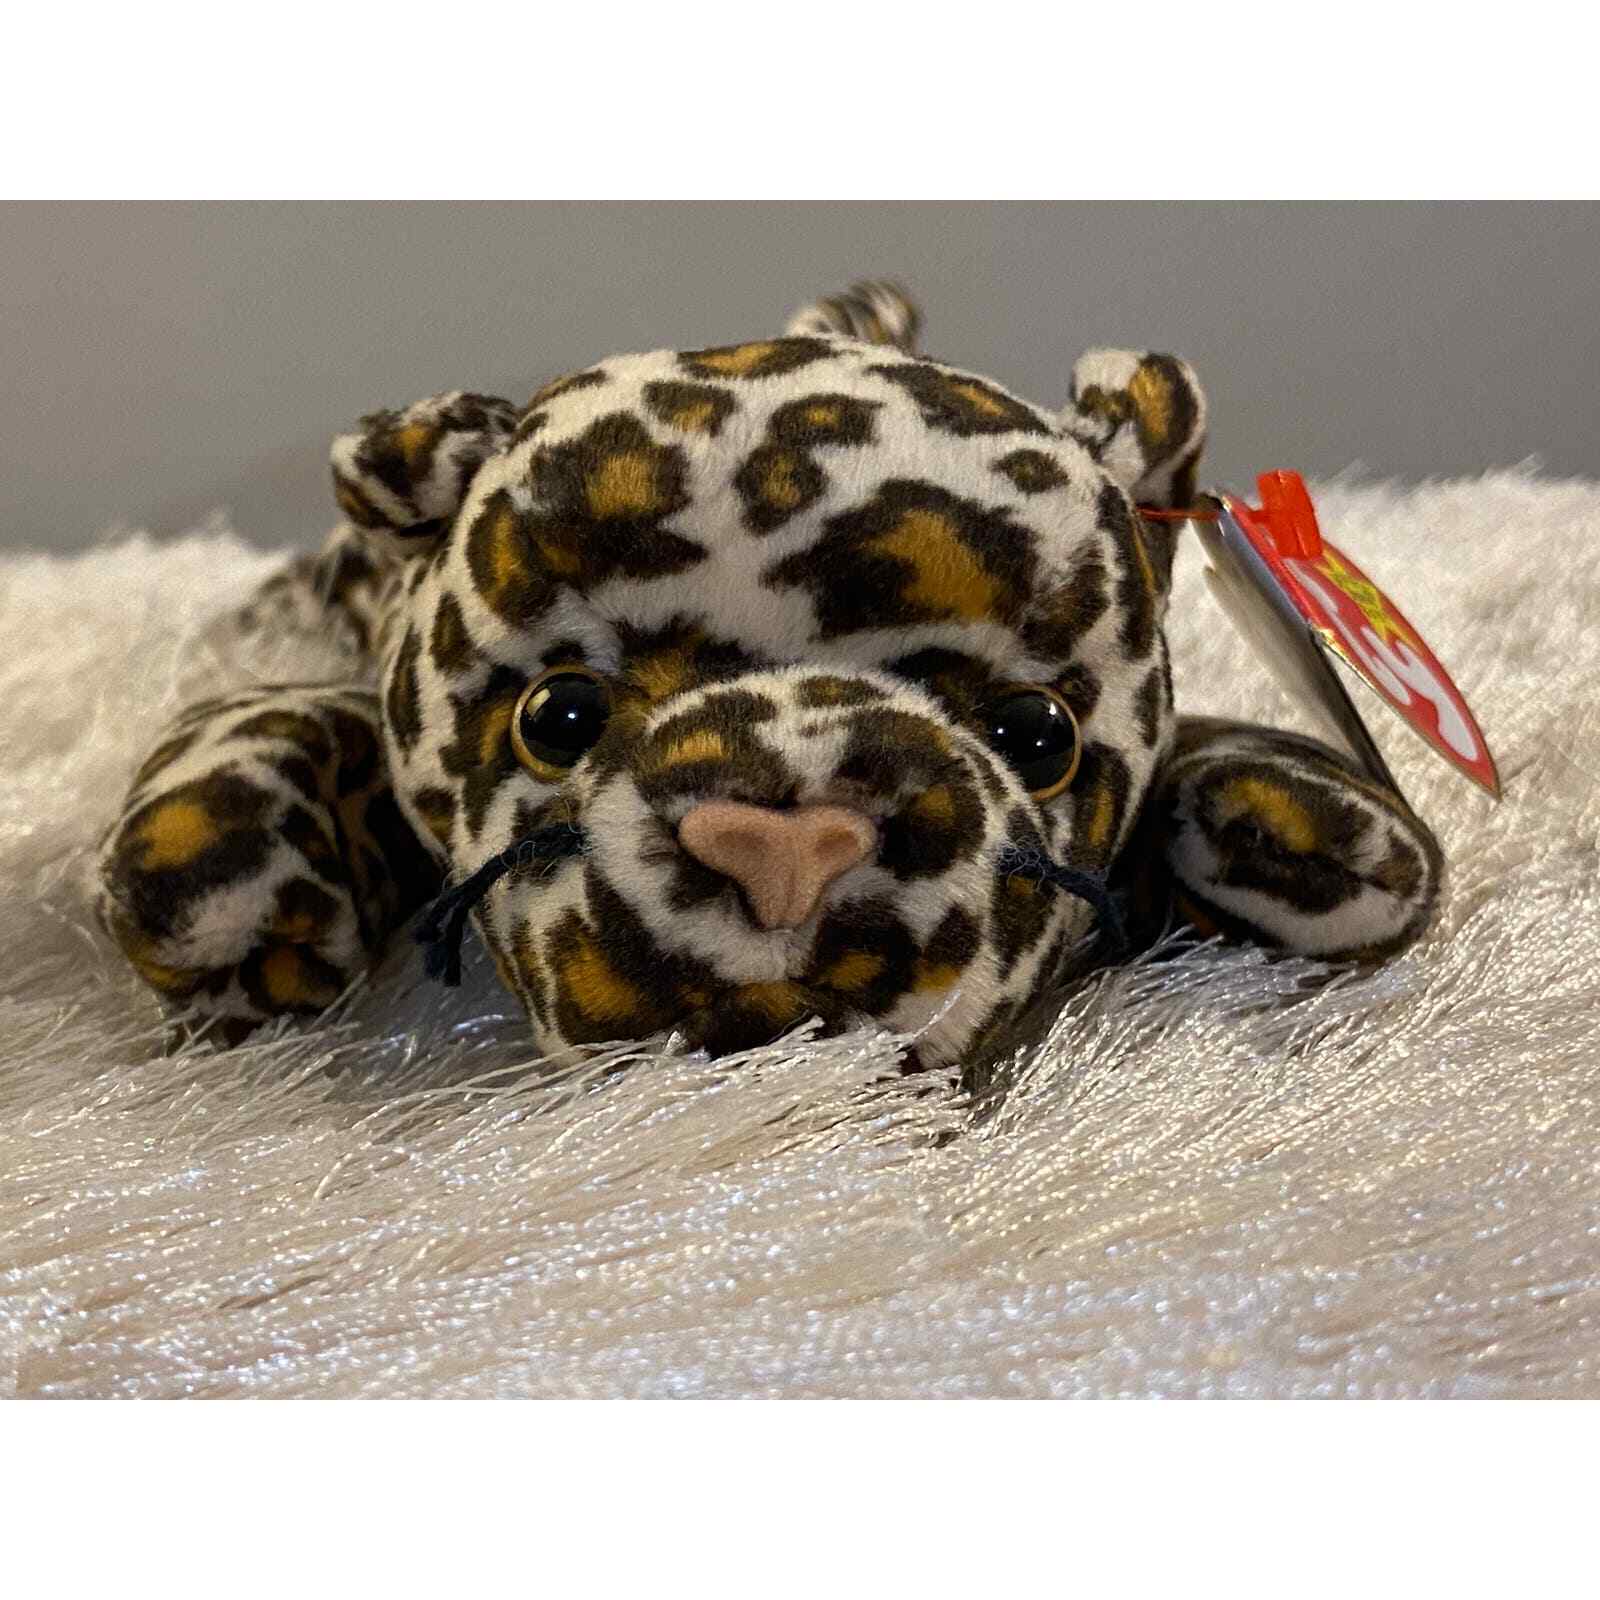 RARE PVC 1996 Early Ed Ty Beanie Baby Freckles the Leopard 🐆 MINT condition ✦✧✦